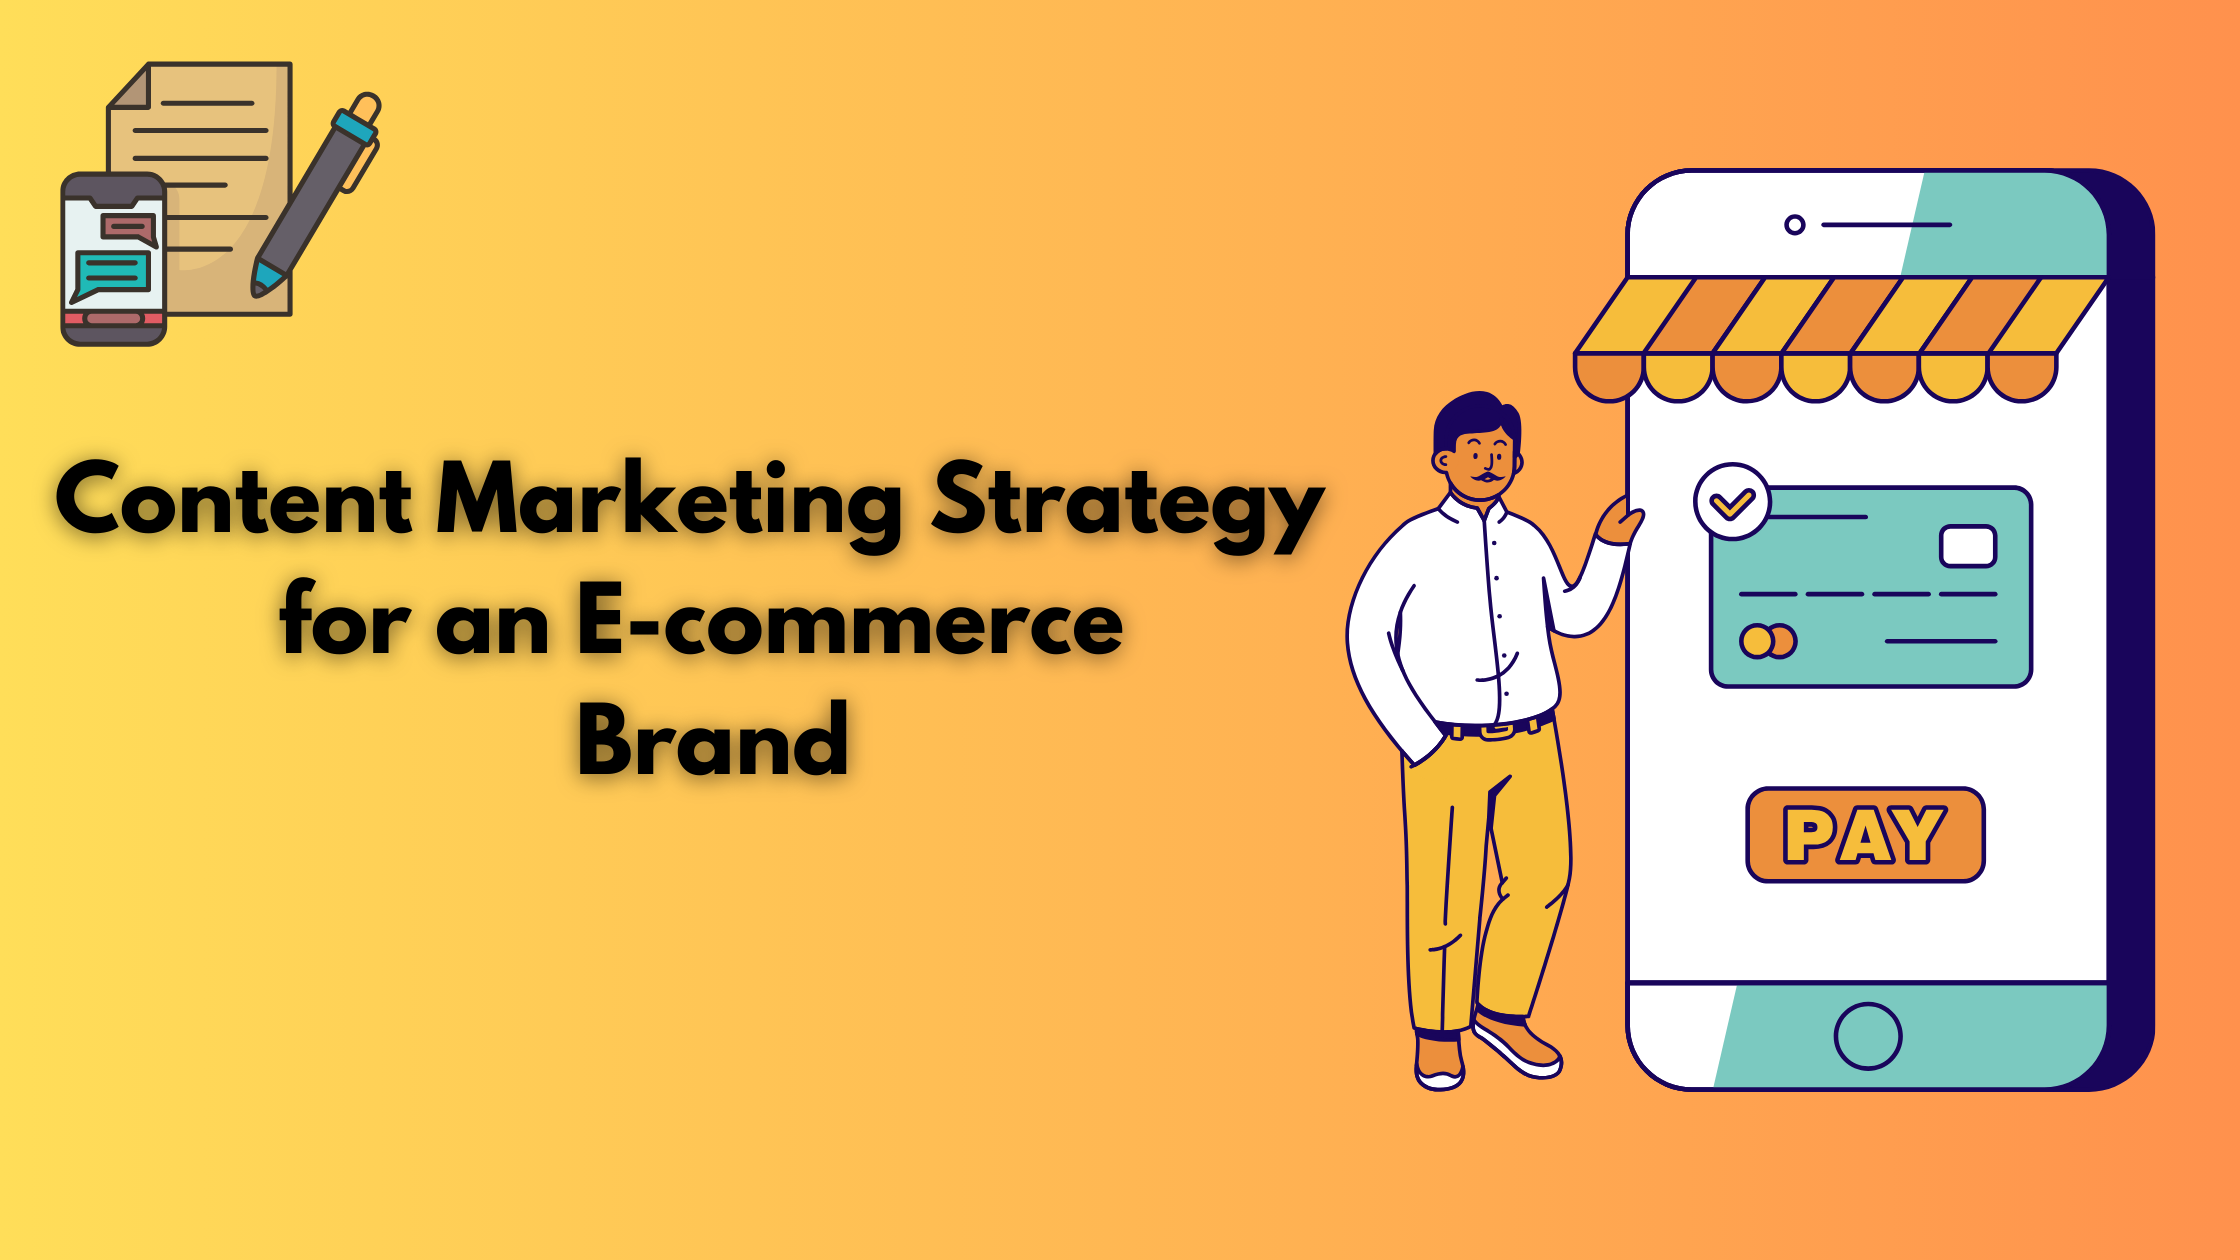 Content Marketing Strategy for an E-commerce Brand